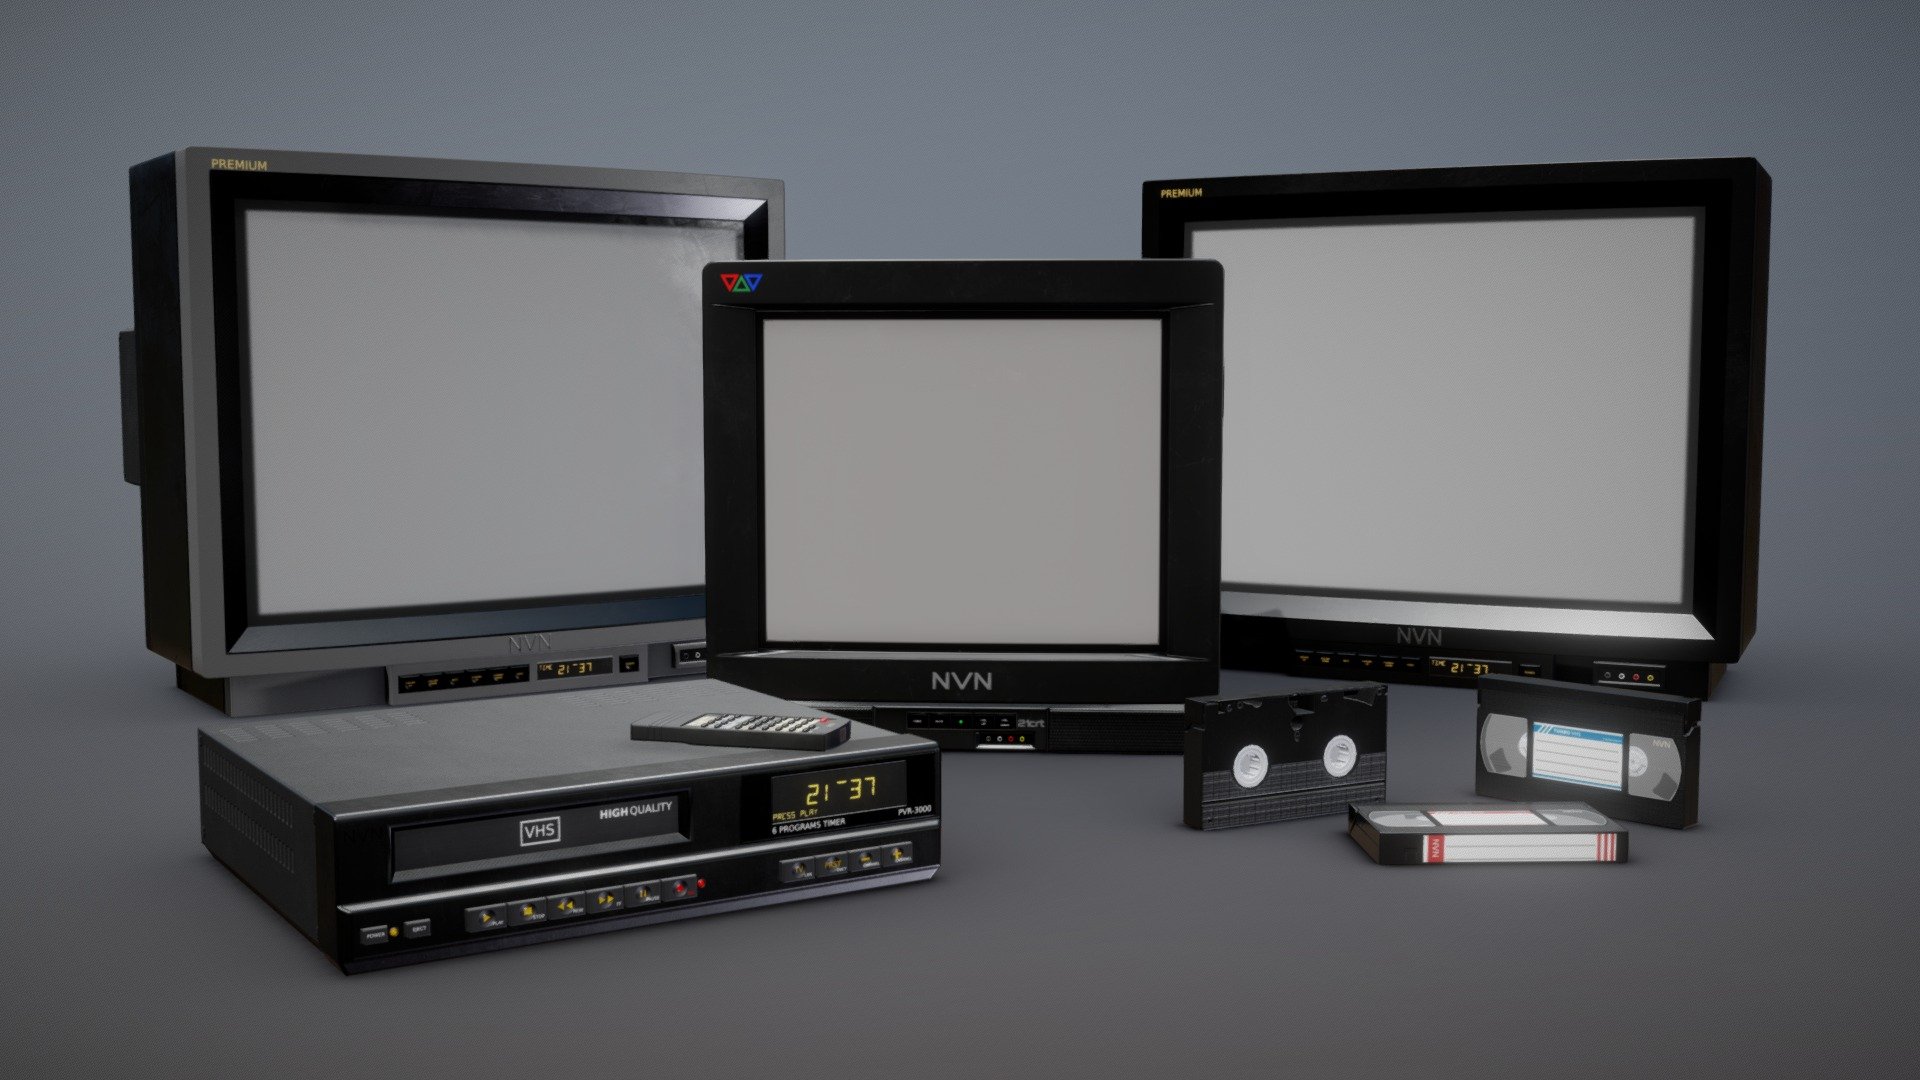 A collection of game-ready 90s TV Props

Models included:

1. Vintage CRT TV 21